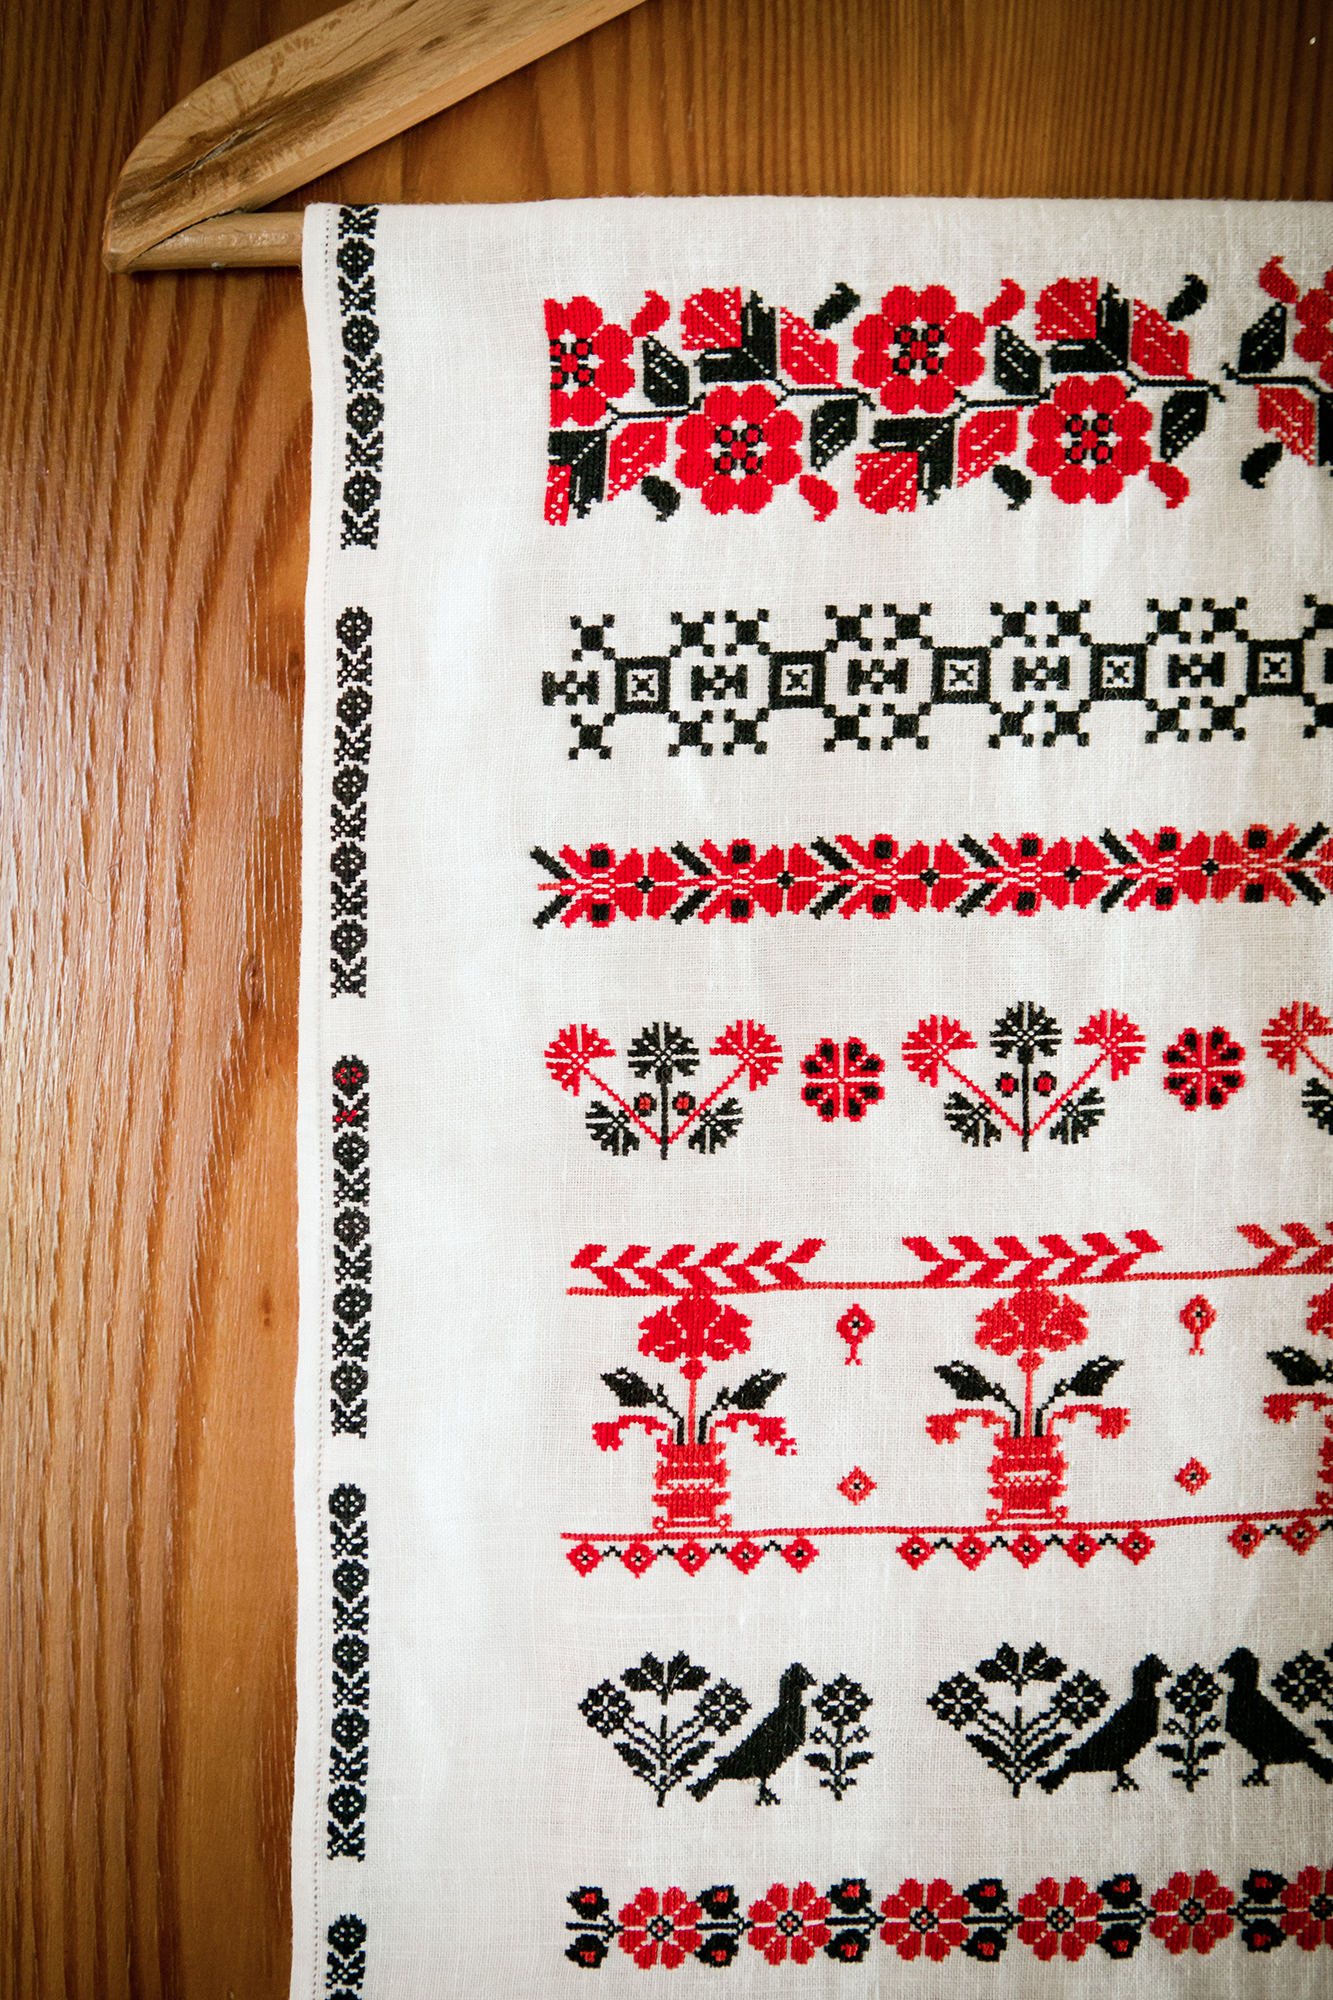 Embroidery from the Ukraininian embroidery sample book.